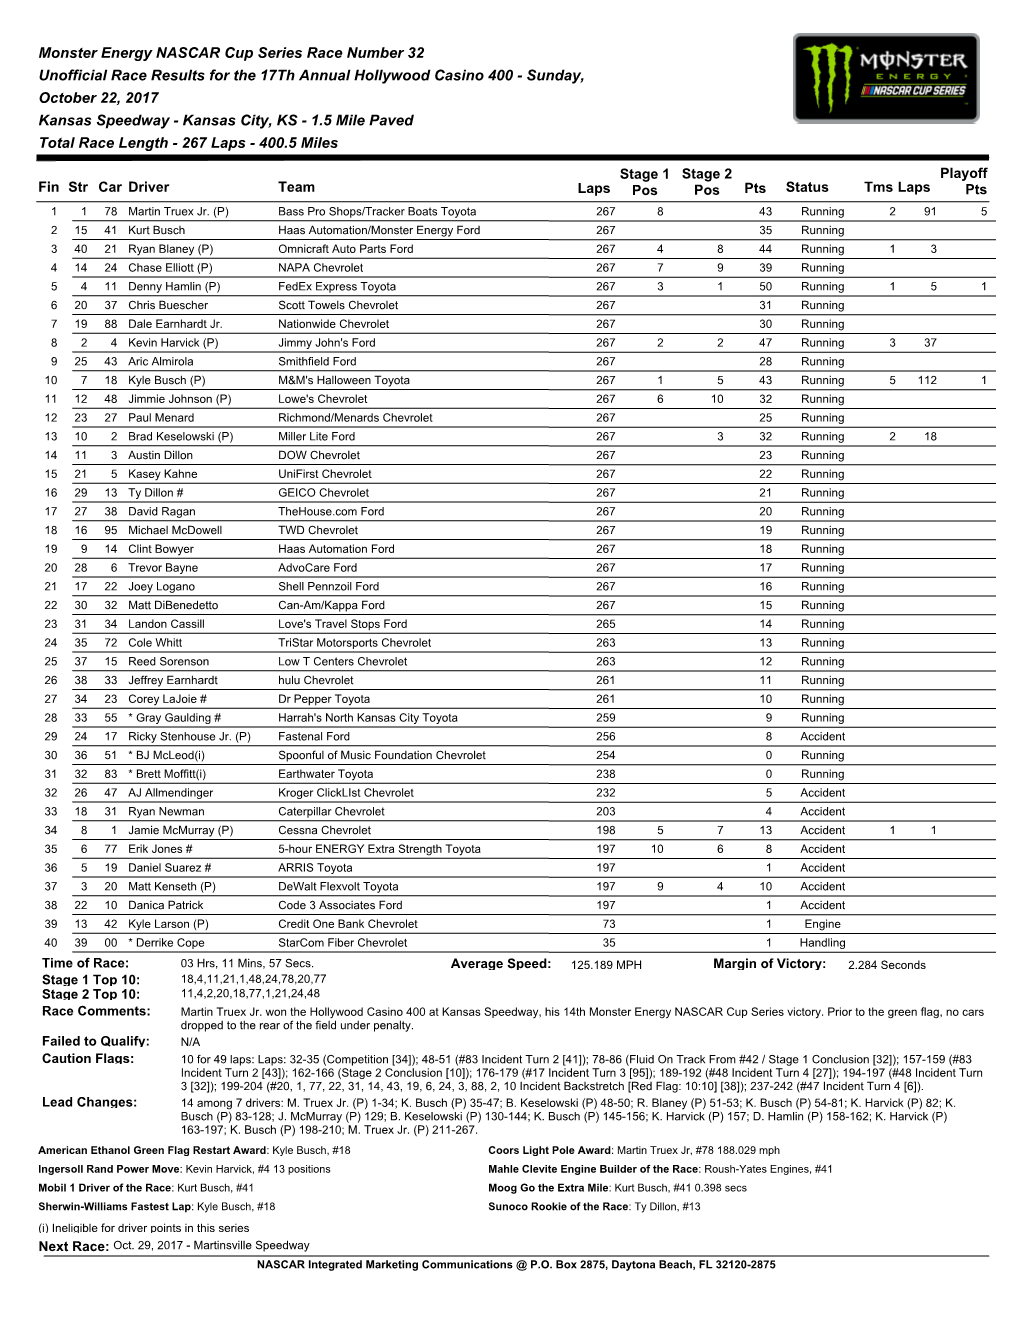 Monster Energy NASCAR Cup Series Race Number 32 Unofficial Race